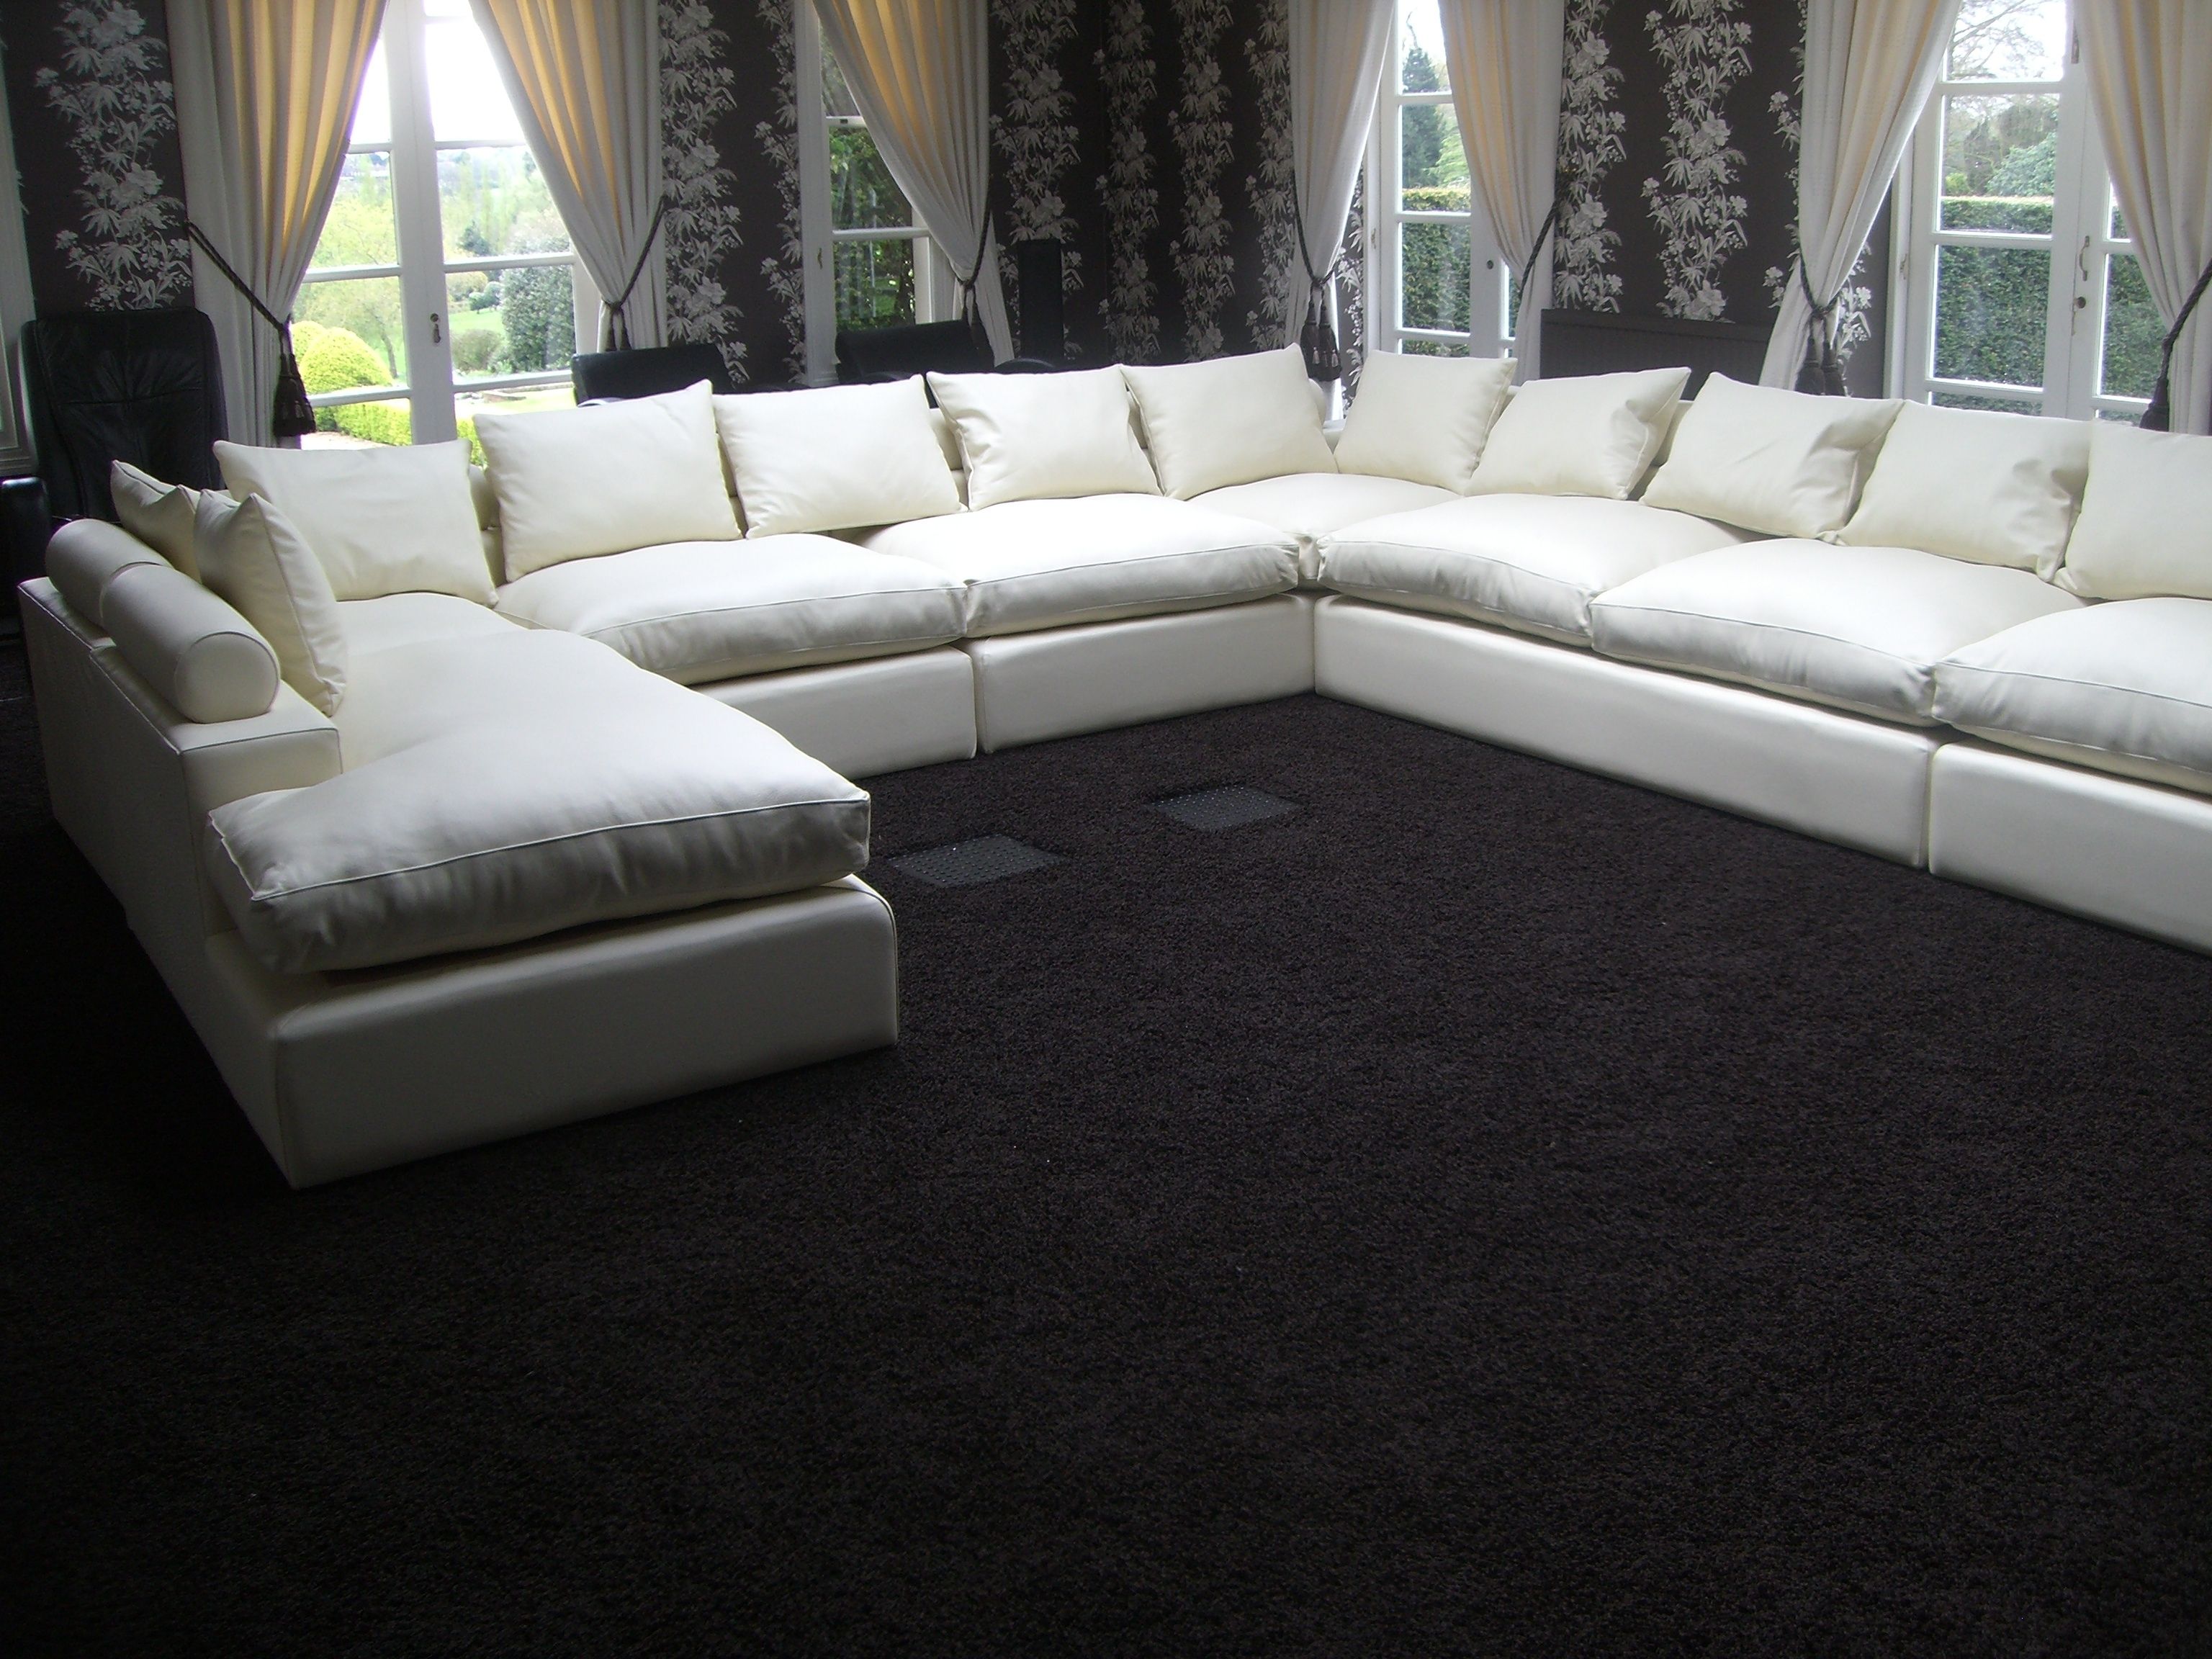 Large U Shaped Sectionals Regarding Most Recent Large U Shaped Sofa – Fjellkjeden (View 1 of 20)